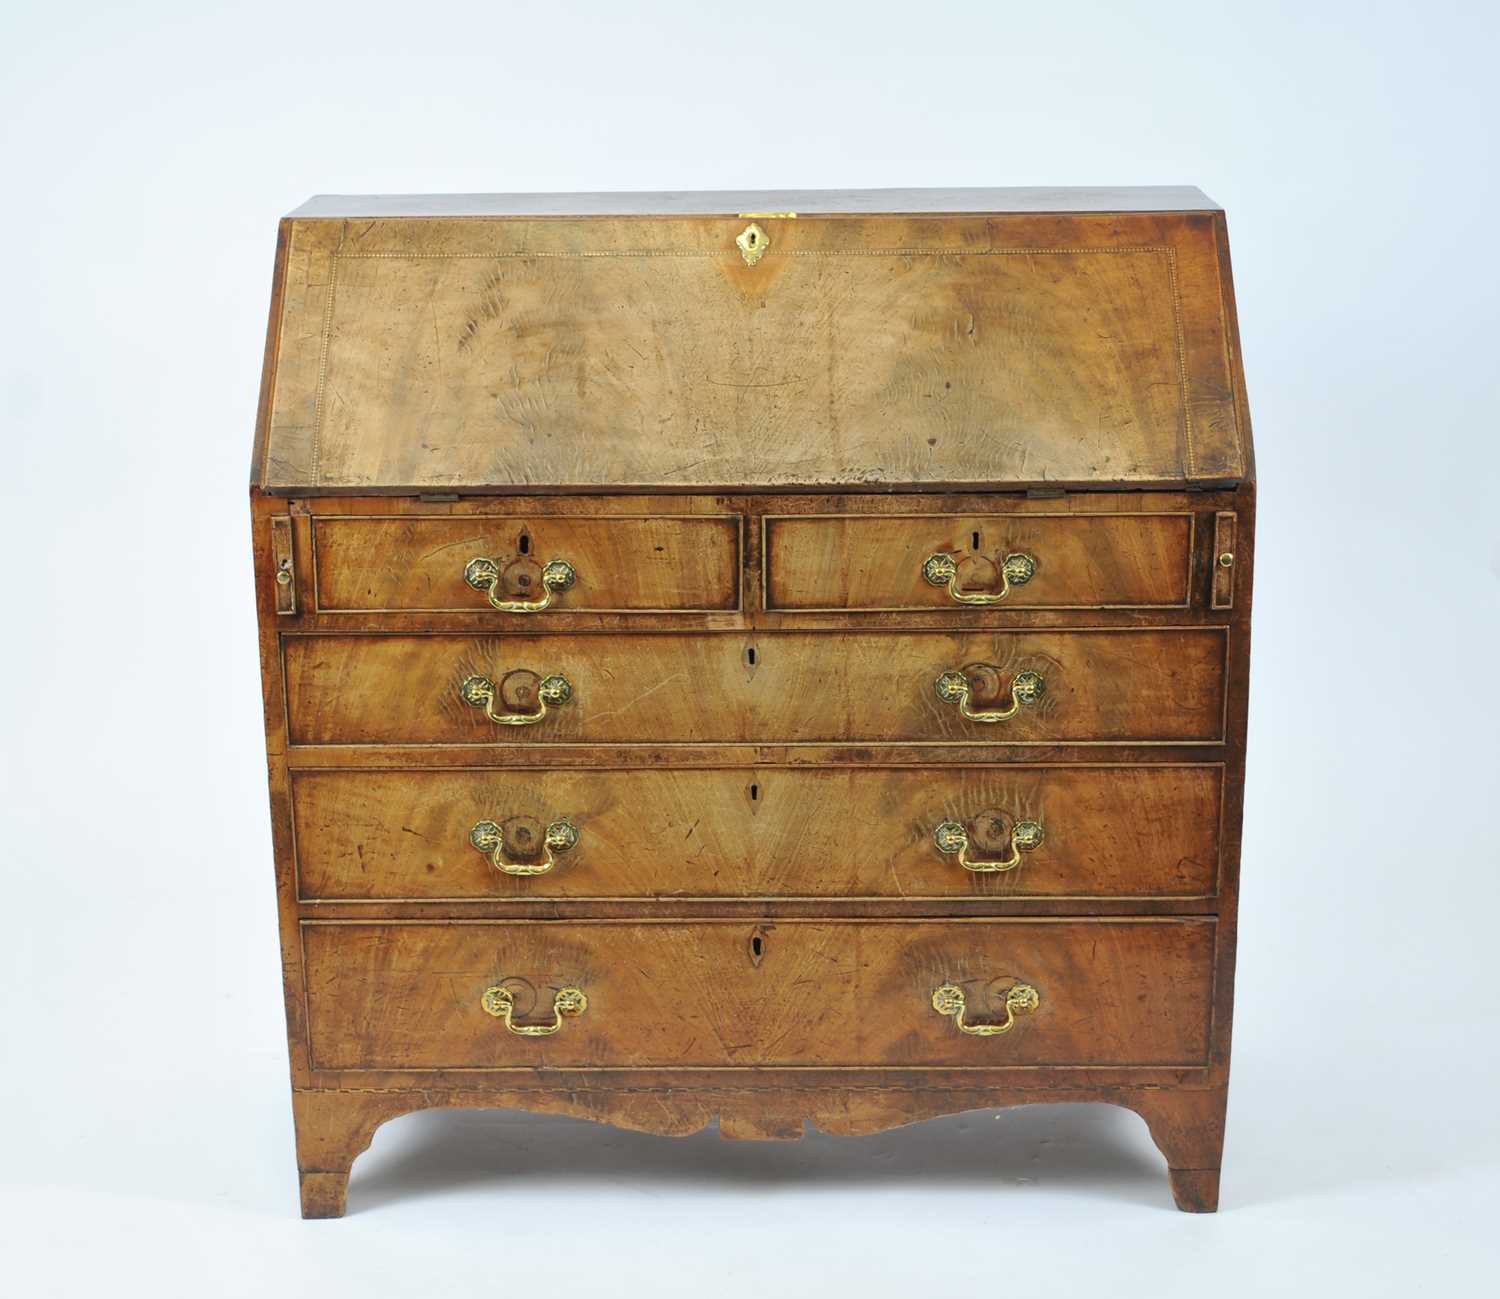 An early George III walnut and mahogany bureau, the figured fall with chequered stringing and a